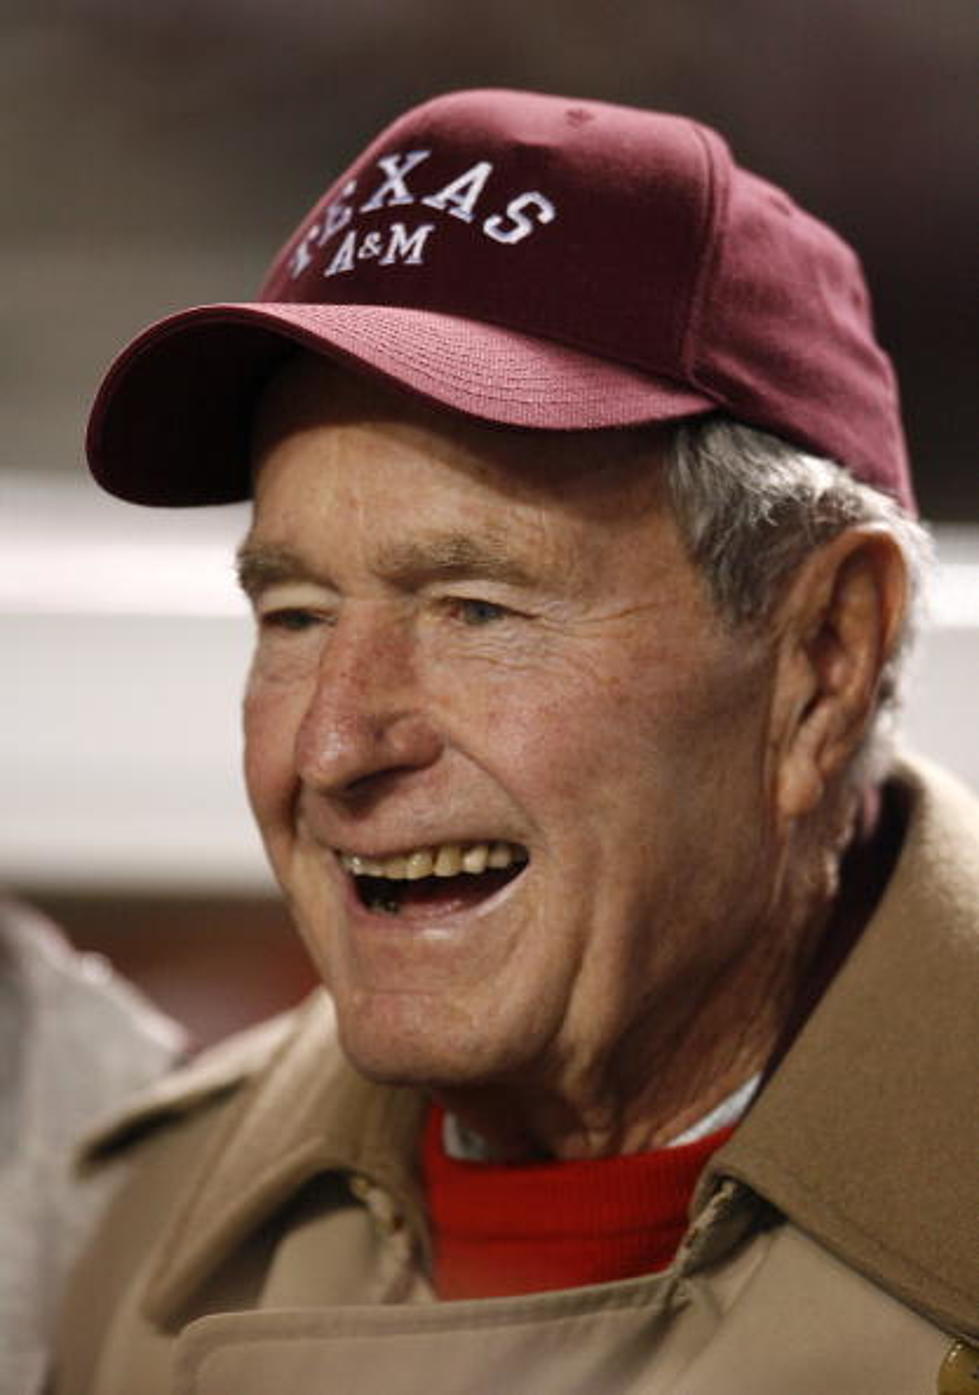 Texas A&M Teams To Honor George H.W. Bush With Patches/Decals the Rest of the Season